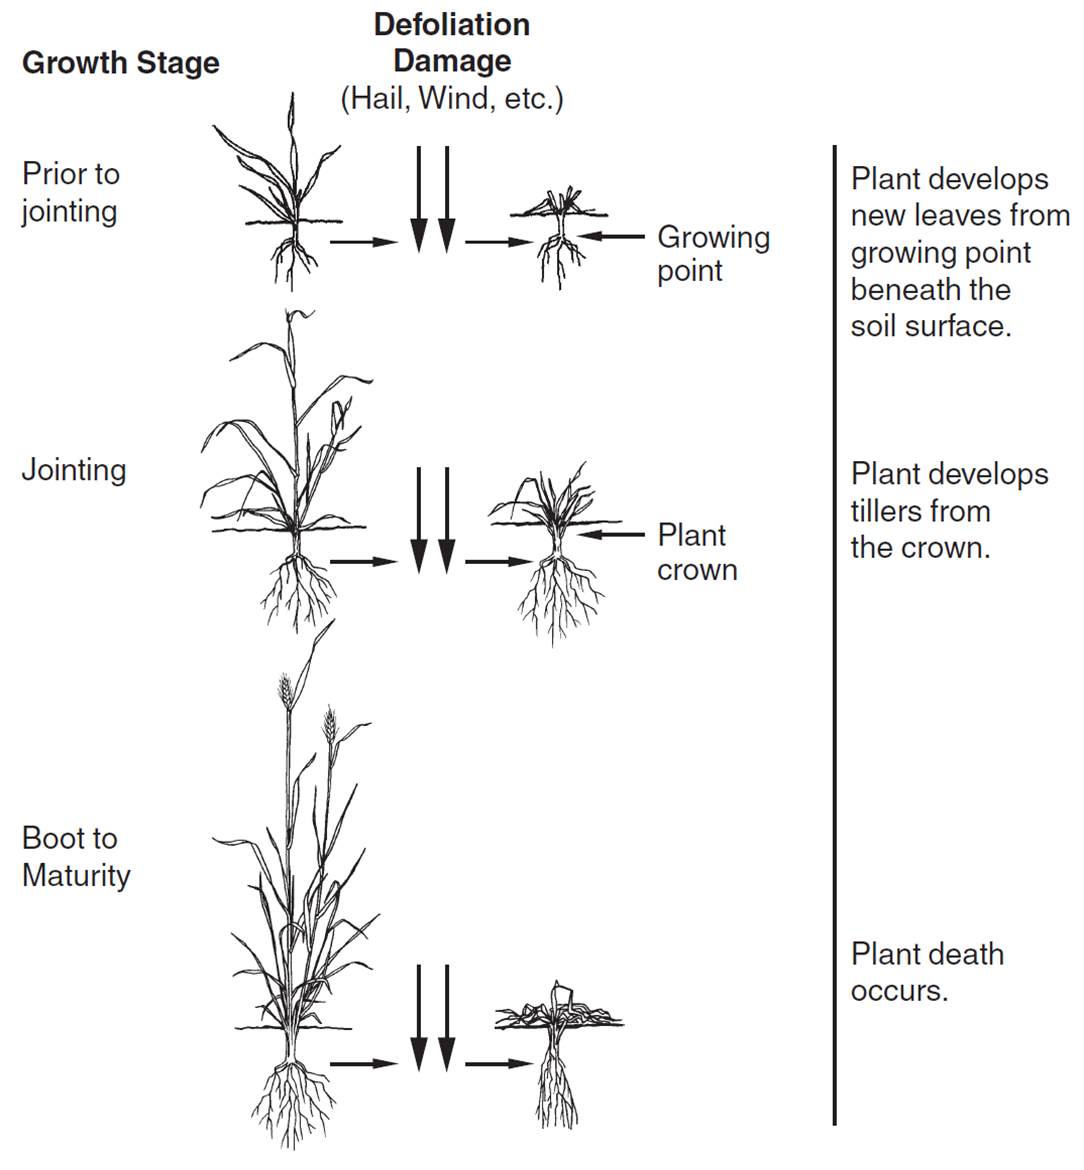 A diagram showing growth stage and defoliation damage